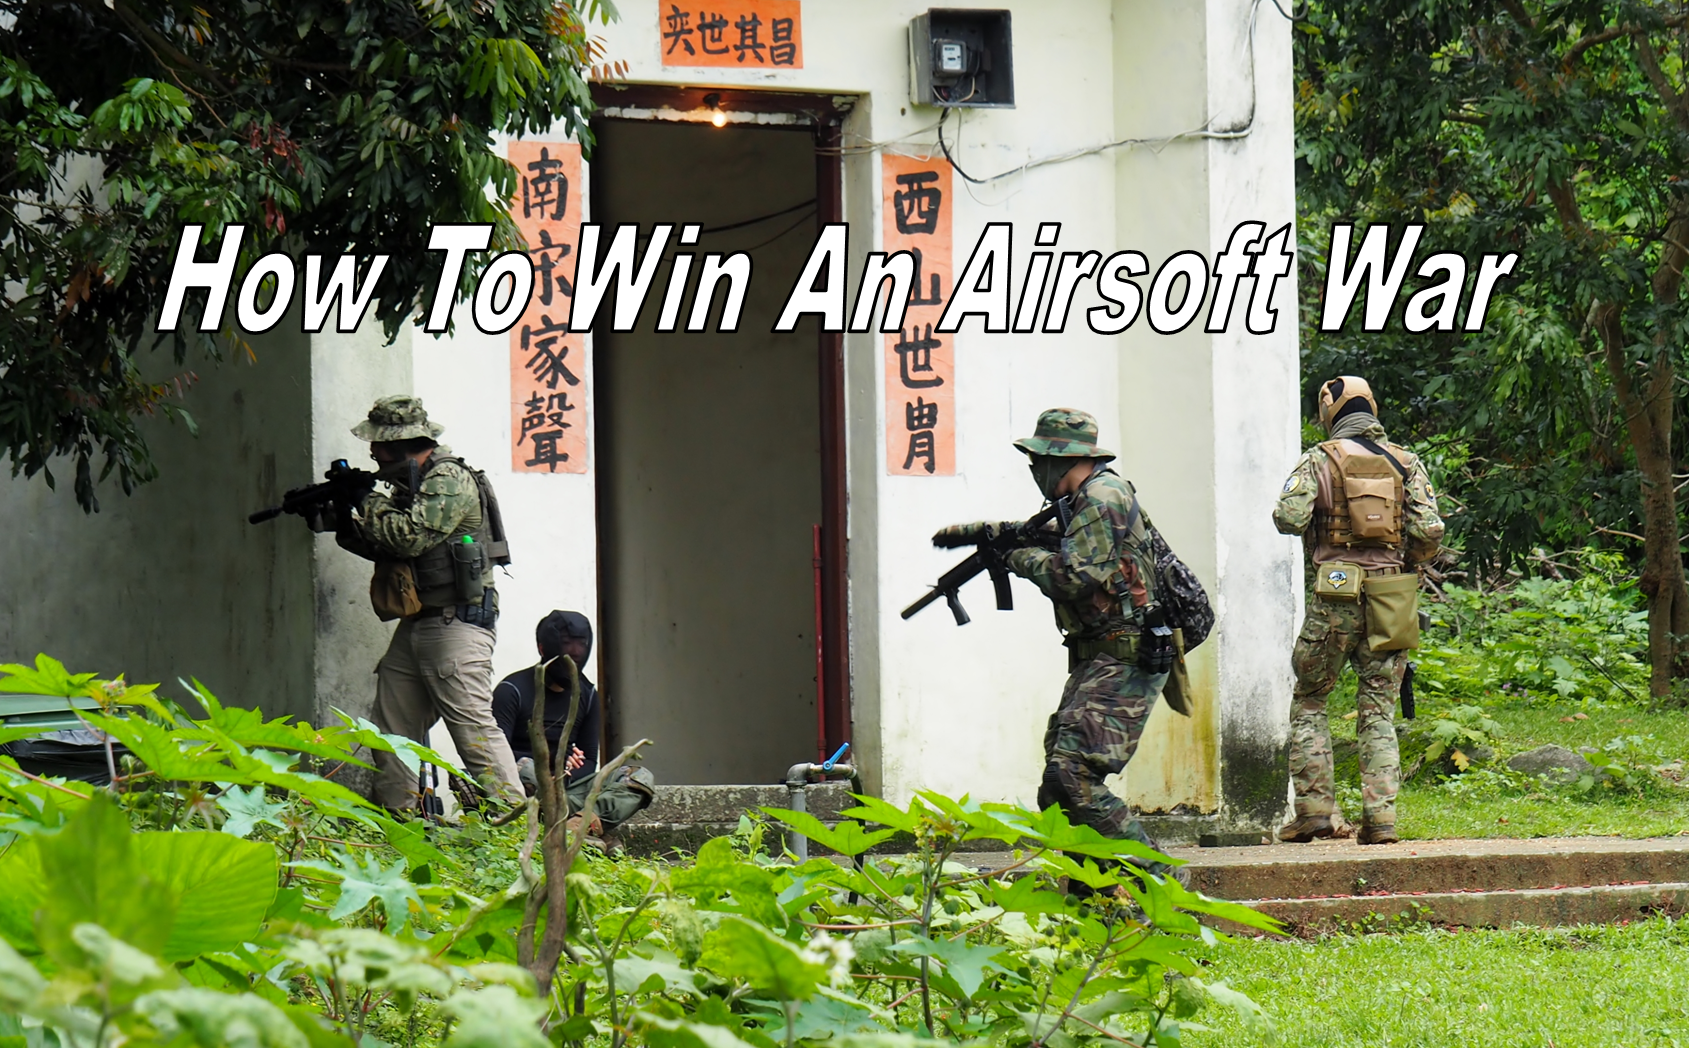 How to Win an Airsoft War